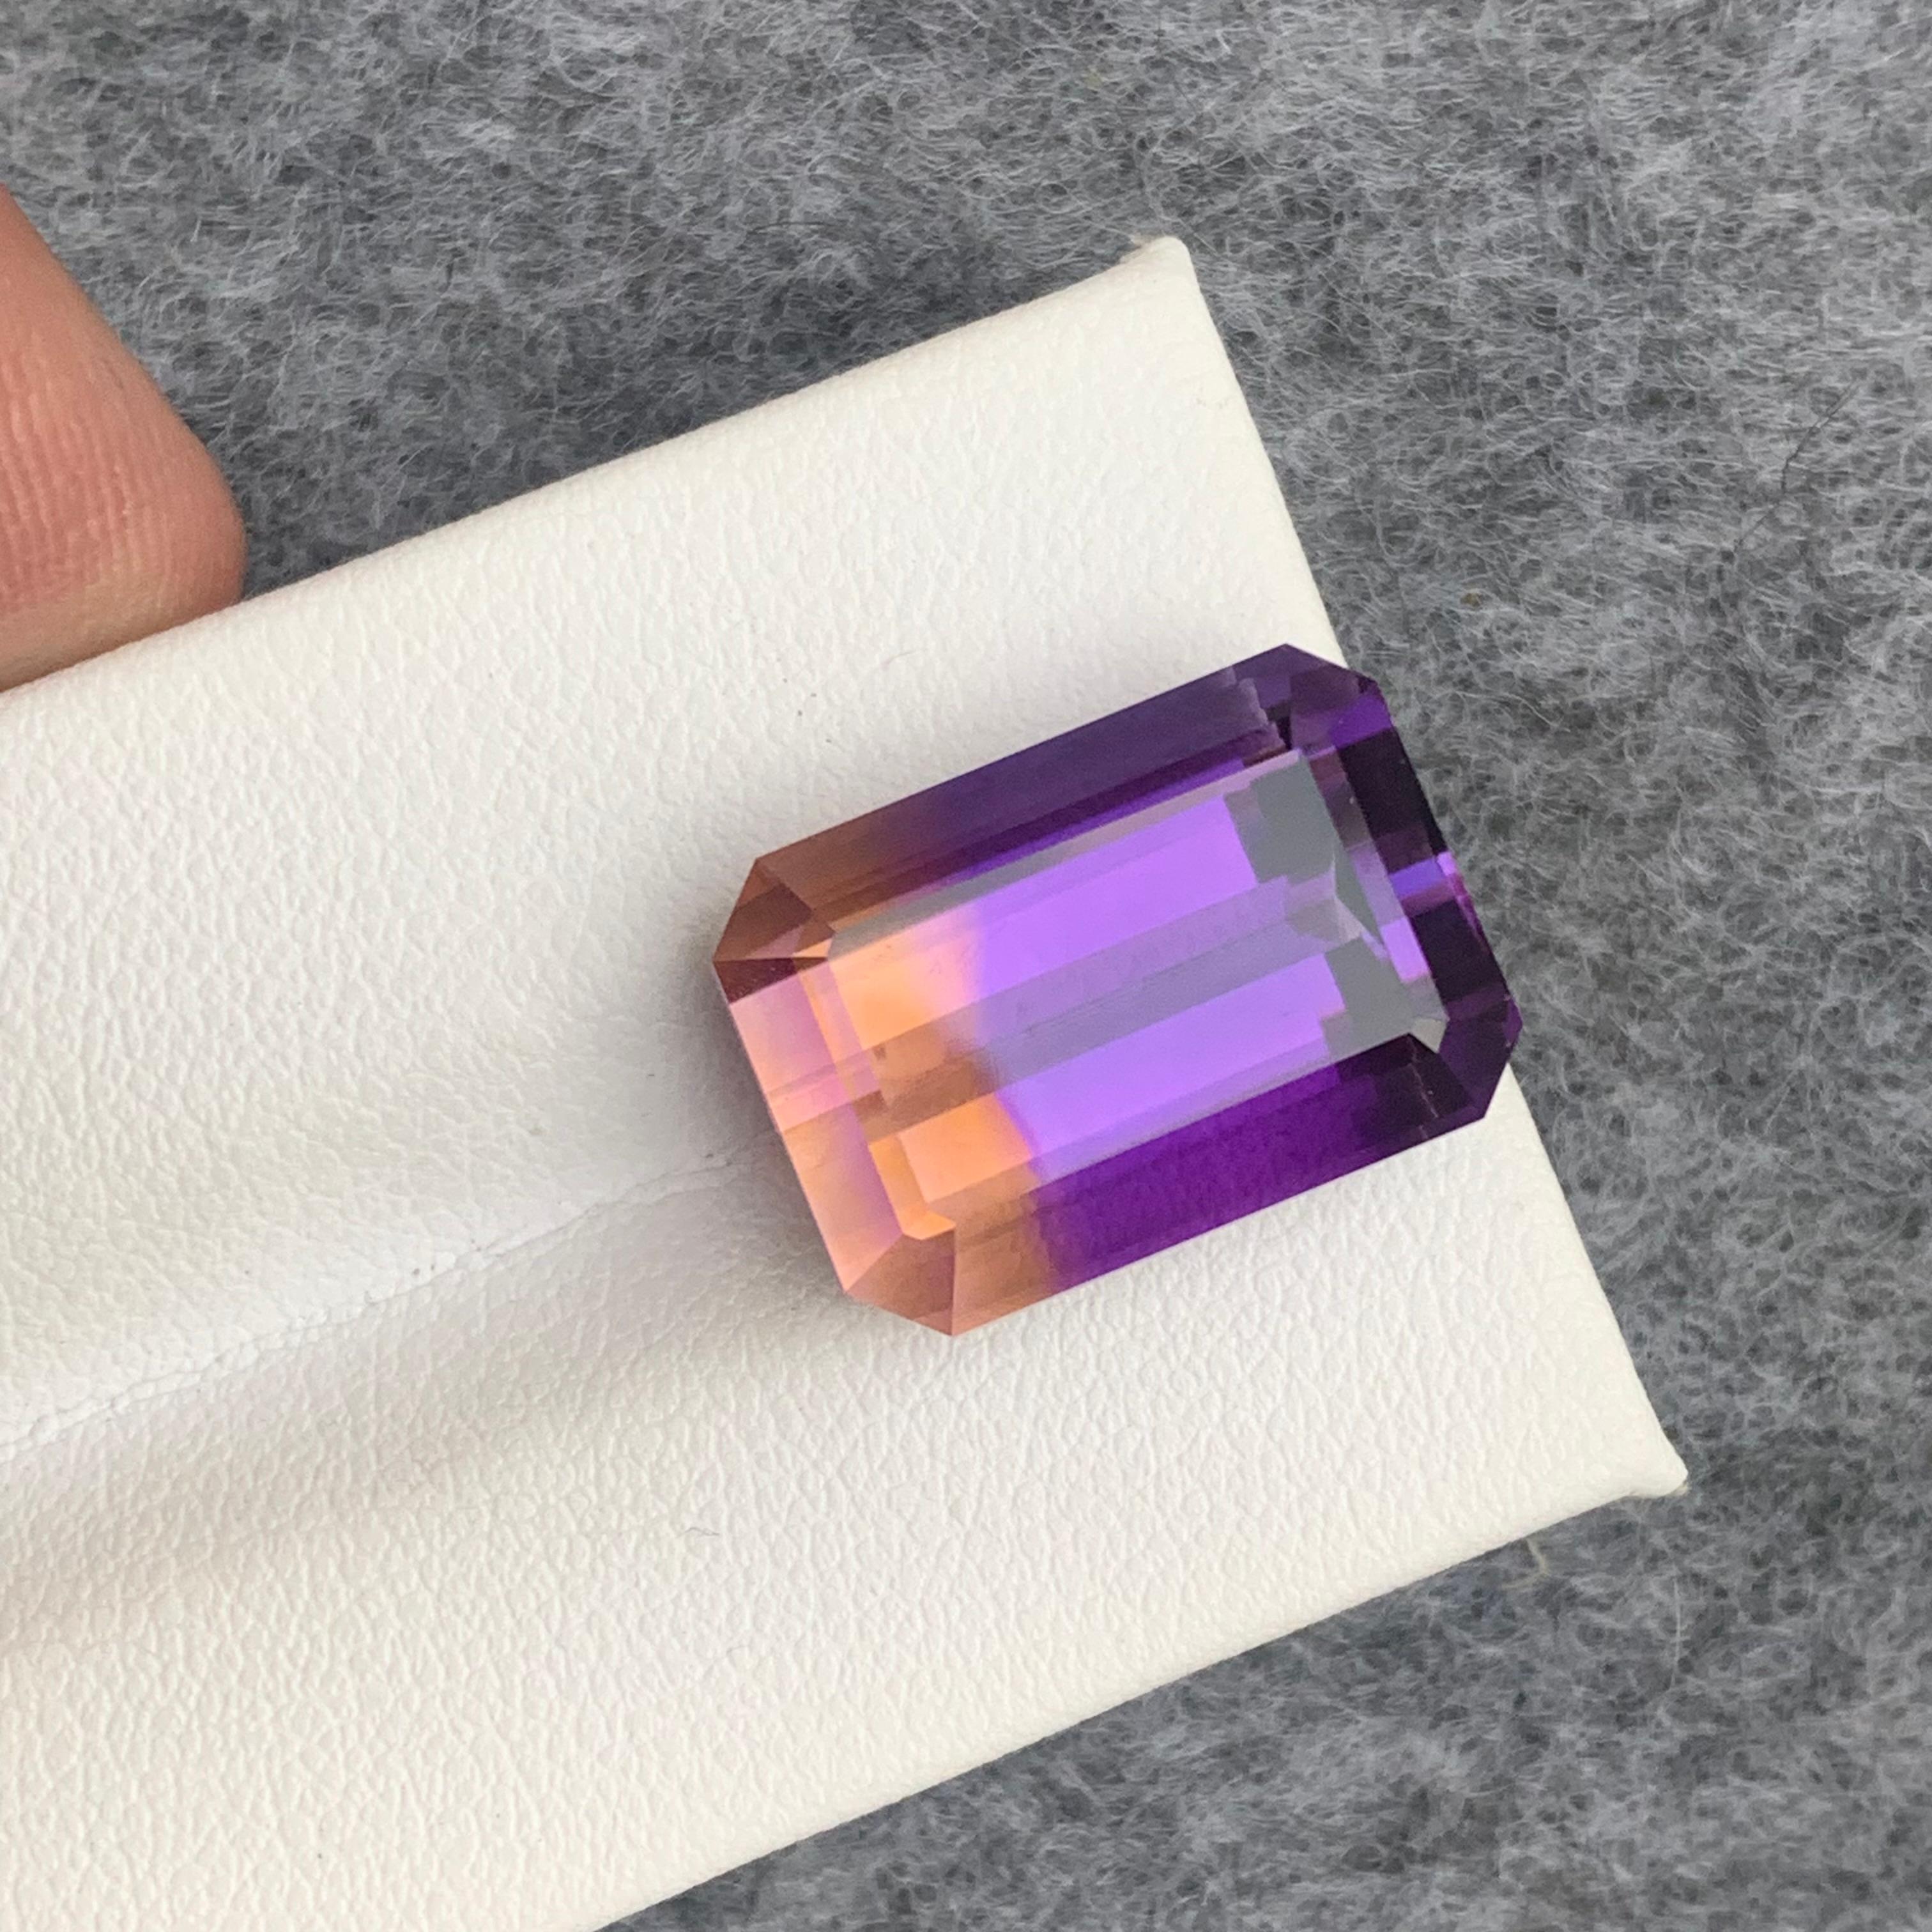 Faceted Ametrine 
Weight: 17.80 Carats
Dimension: 17.7x12.5x10.3 Mm
Origin: Bolivia 
Color: Purple & Yellow
Clarity: Loupe Clean
Certificate: On Demand
For those born in the month of February, you've been graced with amethyst as your birthstone.